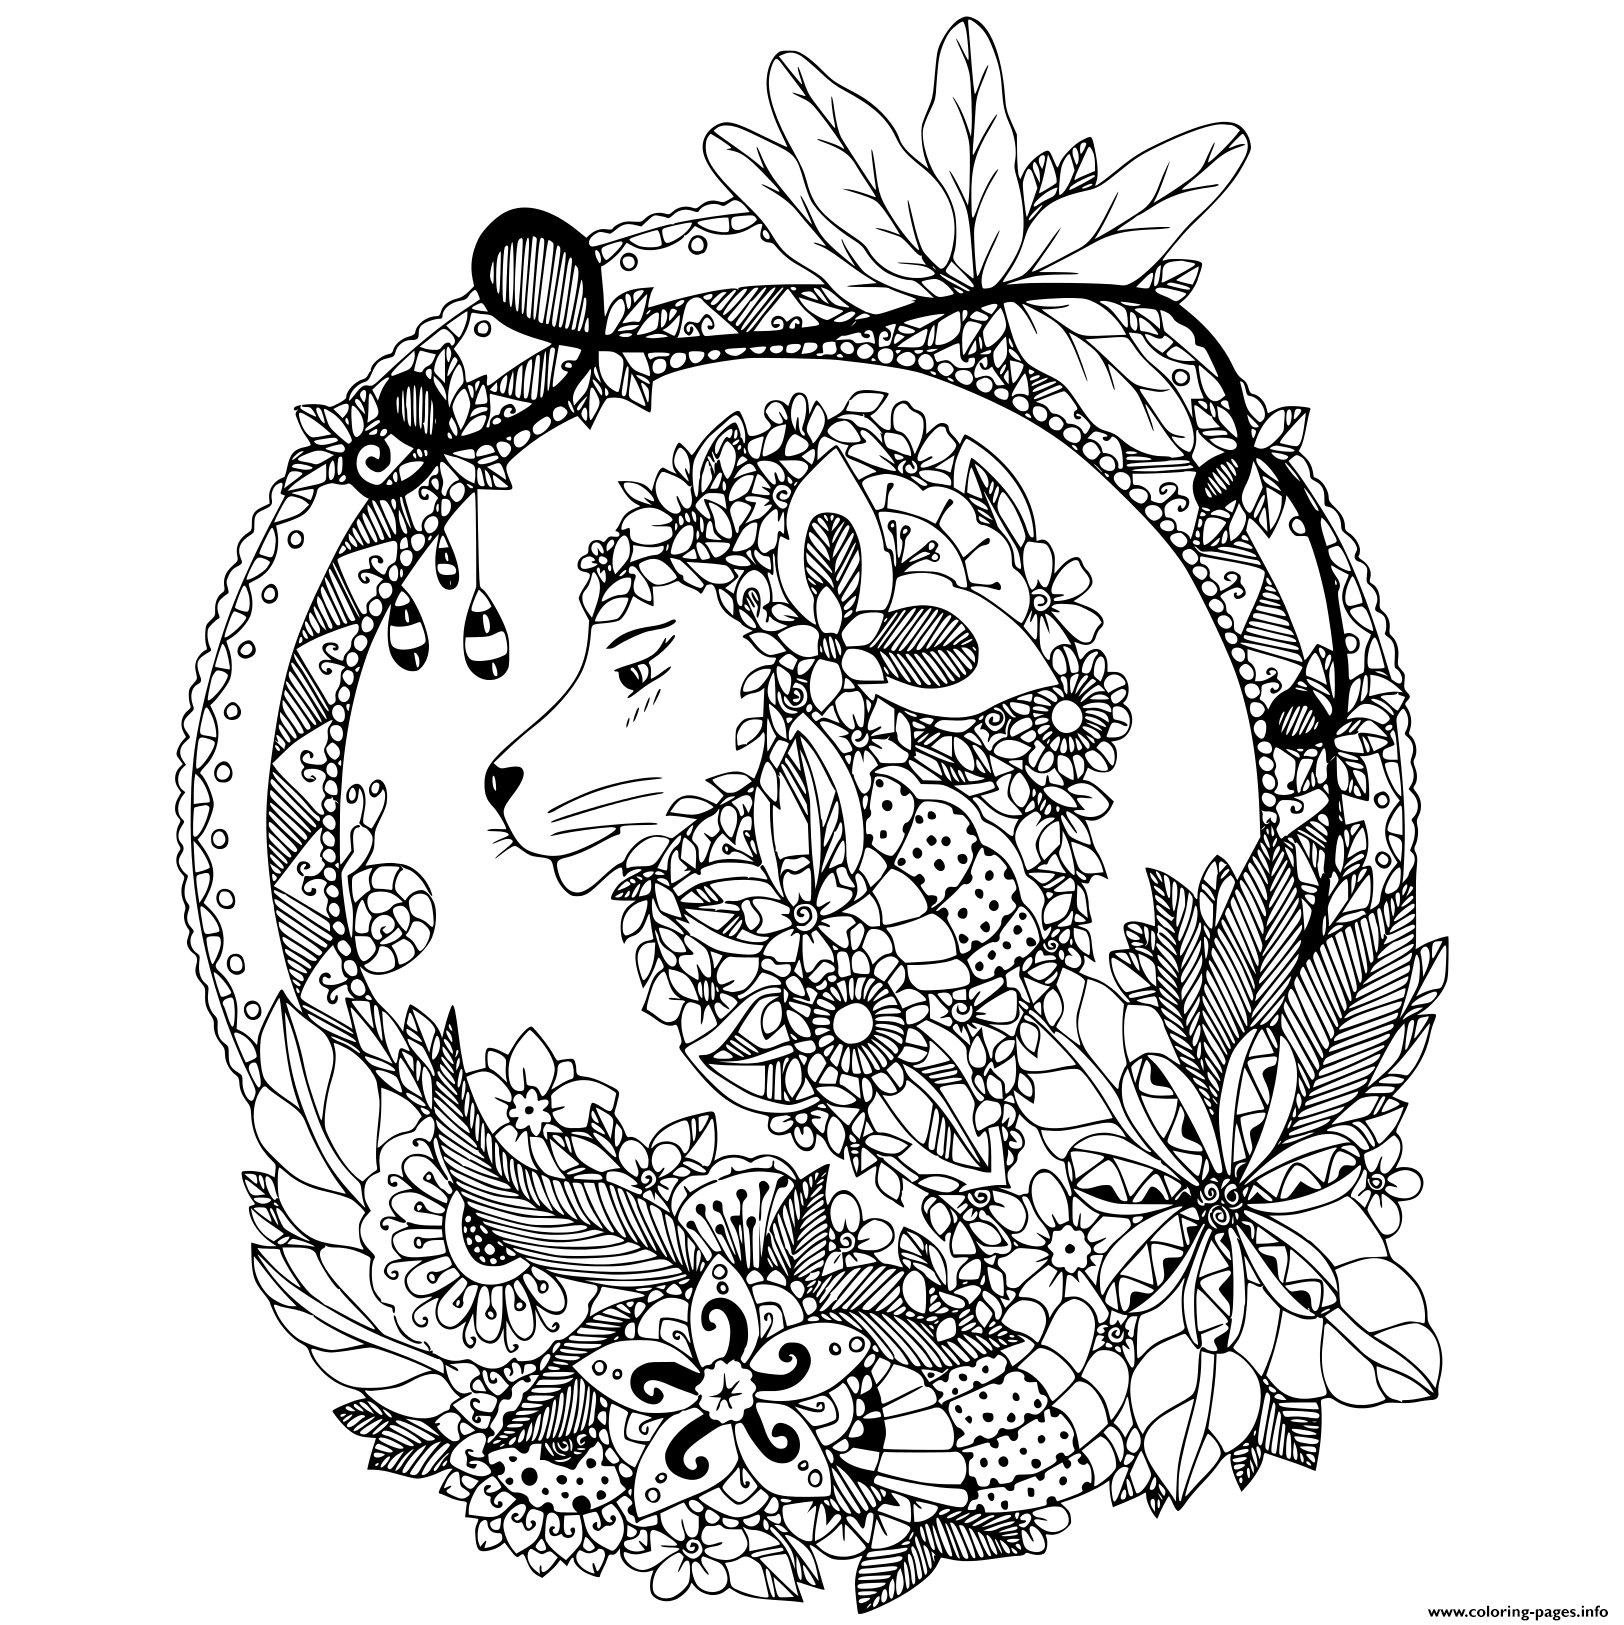 Zentangle Lion Flowers And Vegetation To Adult coloring